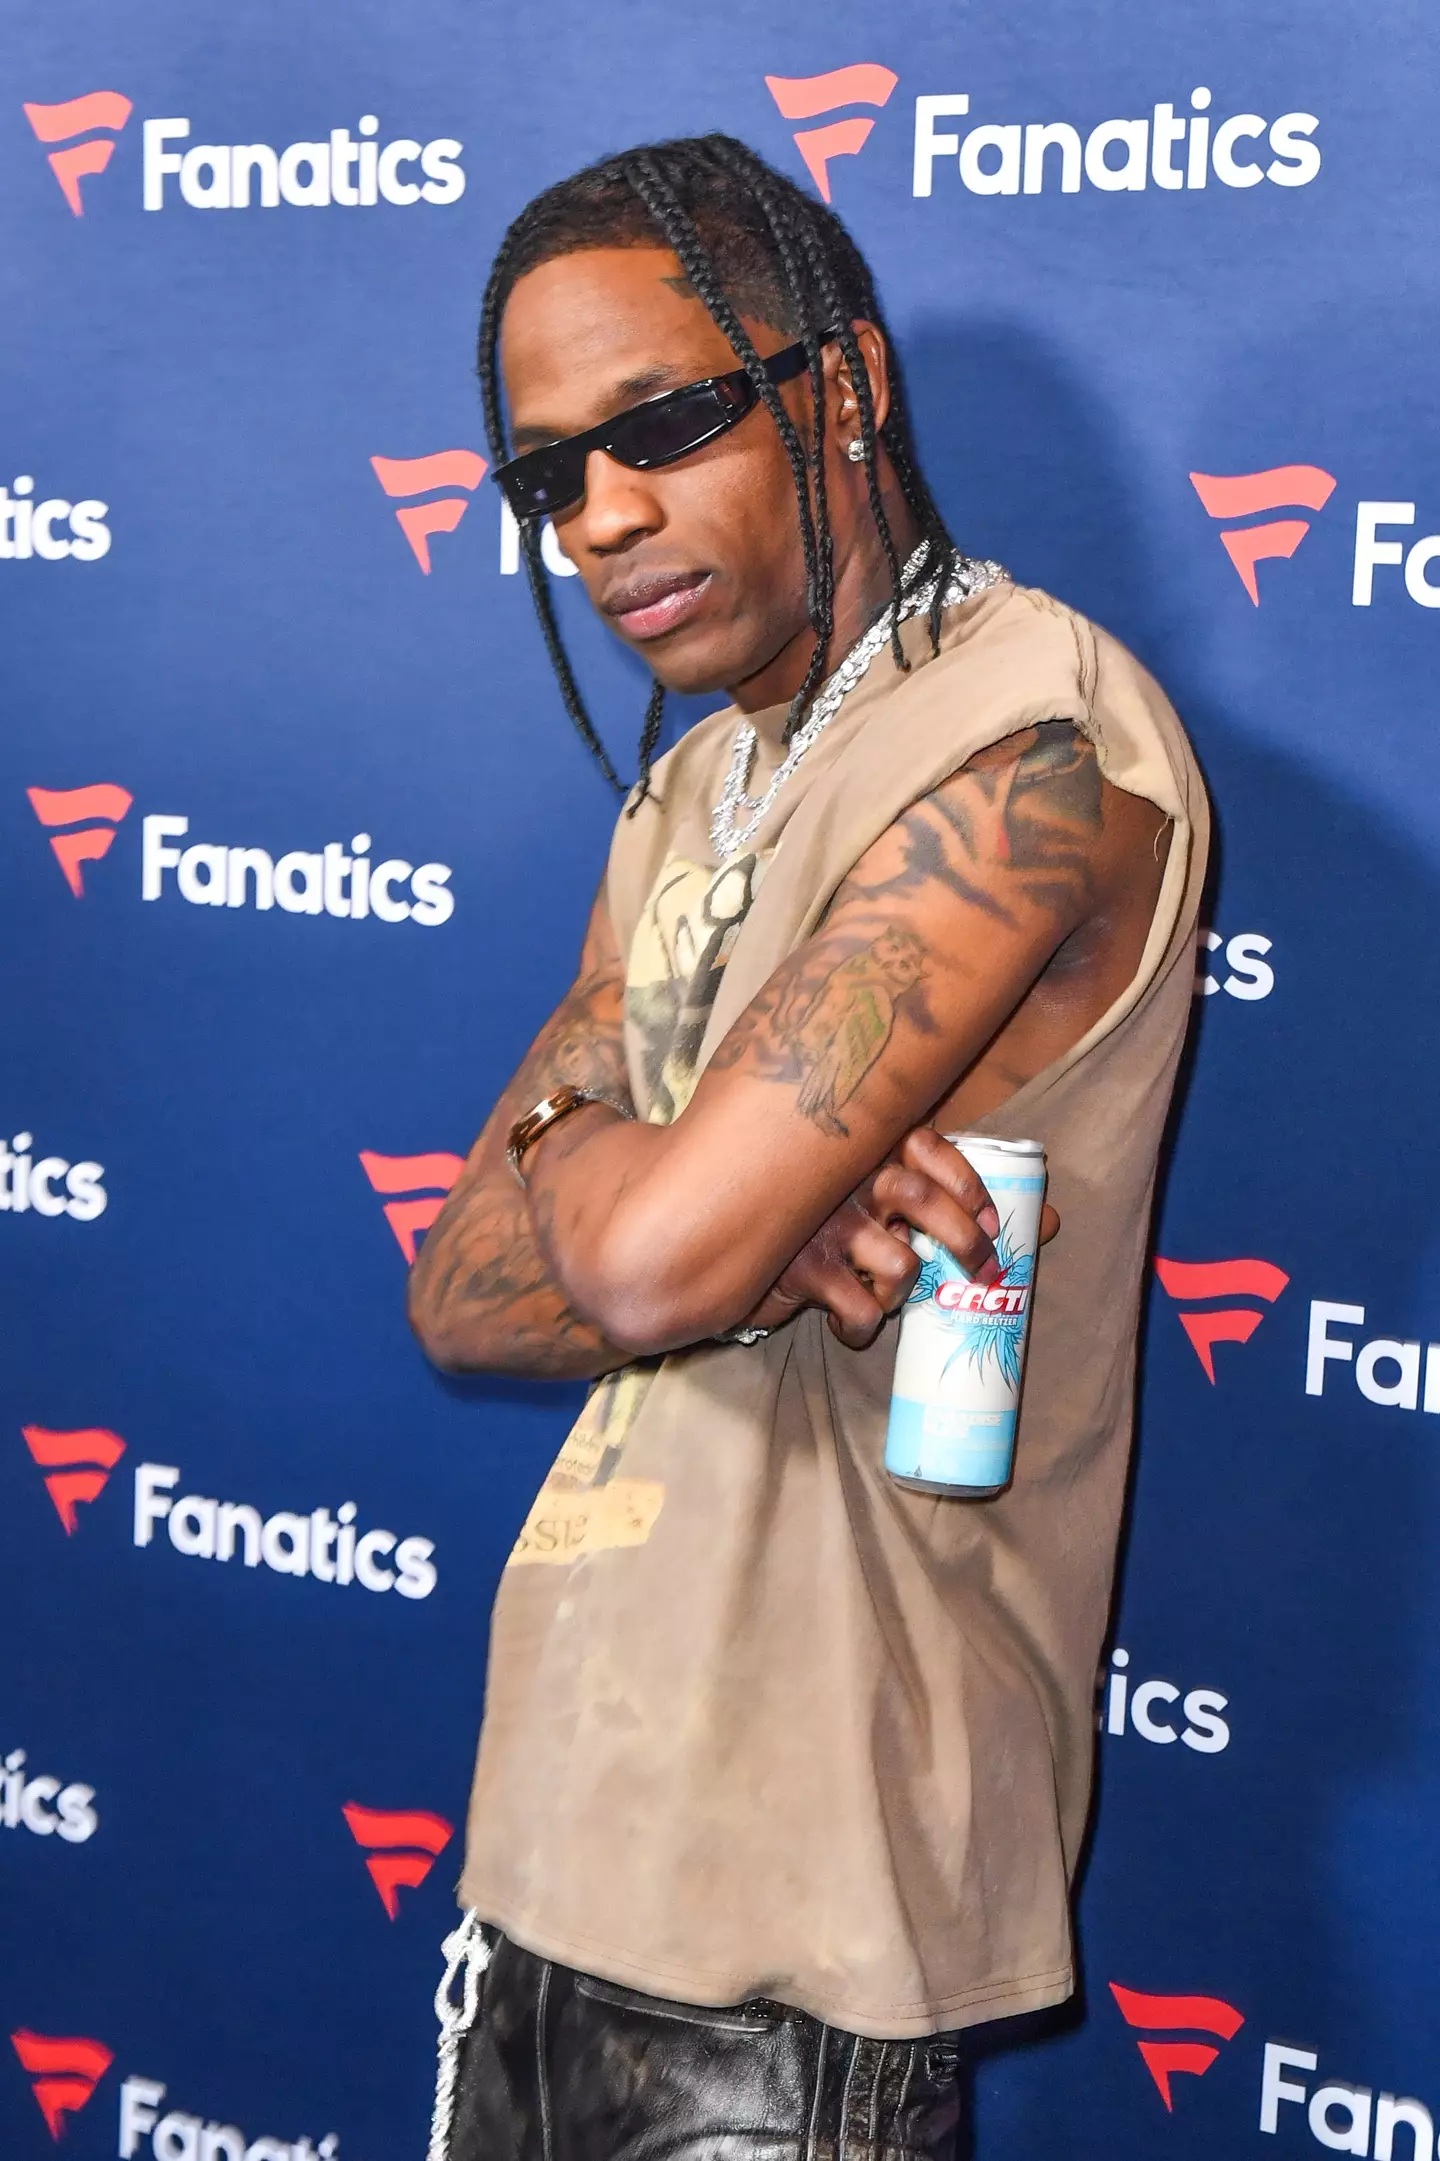 Travis Scott has had four number-one hits in the US.